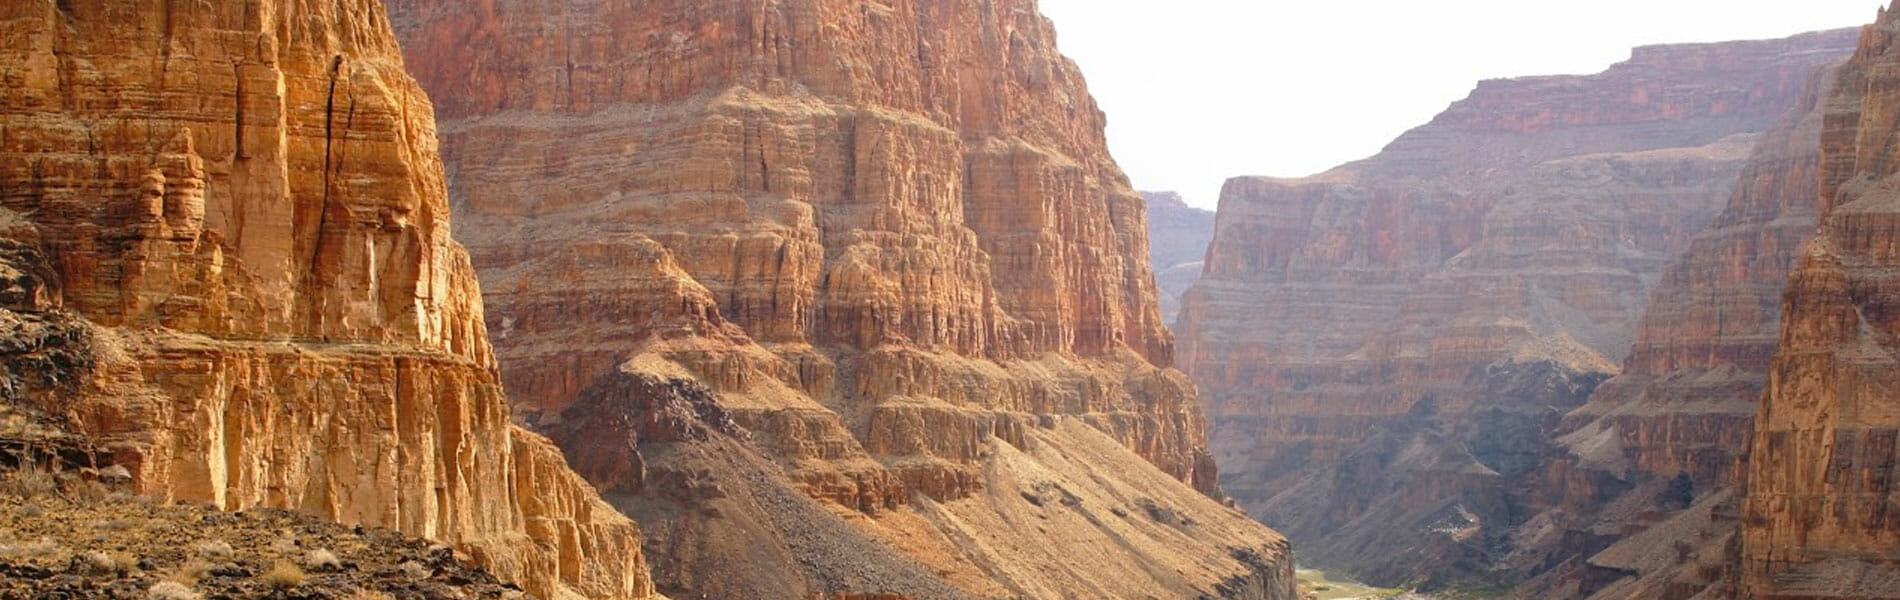 Grand Canyon National Park Tour Package